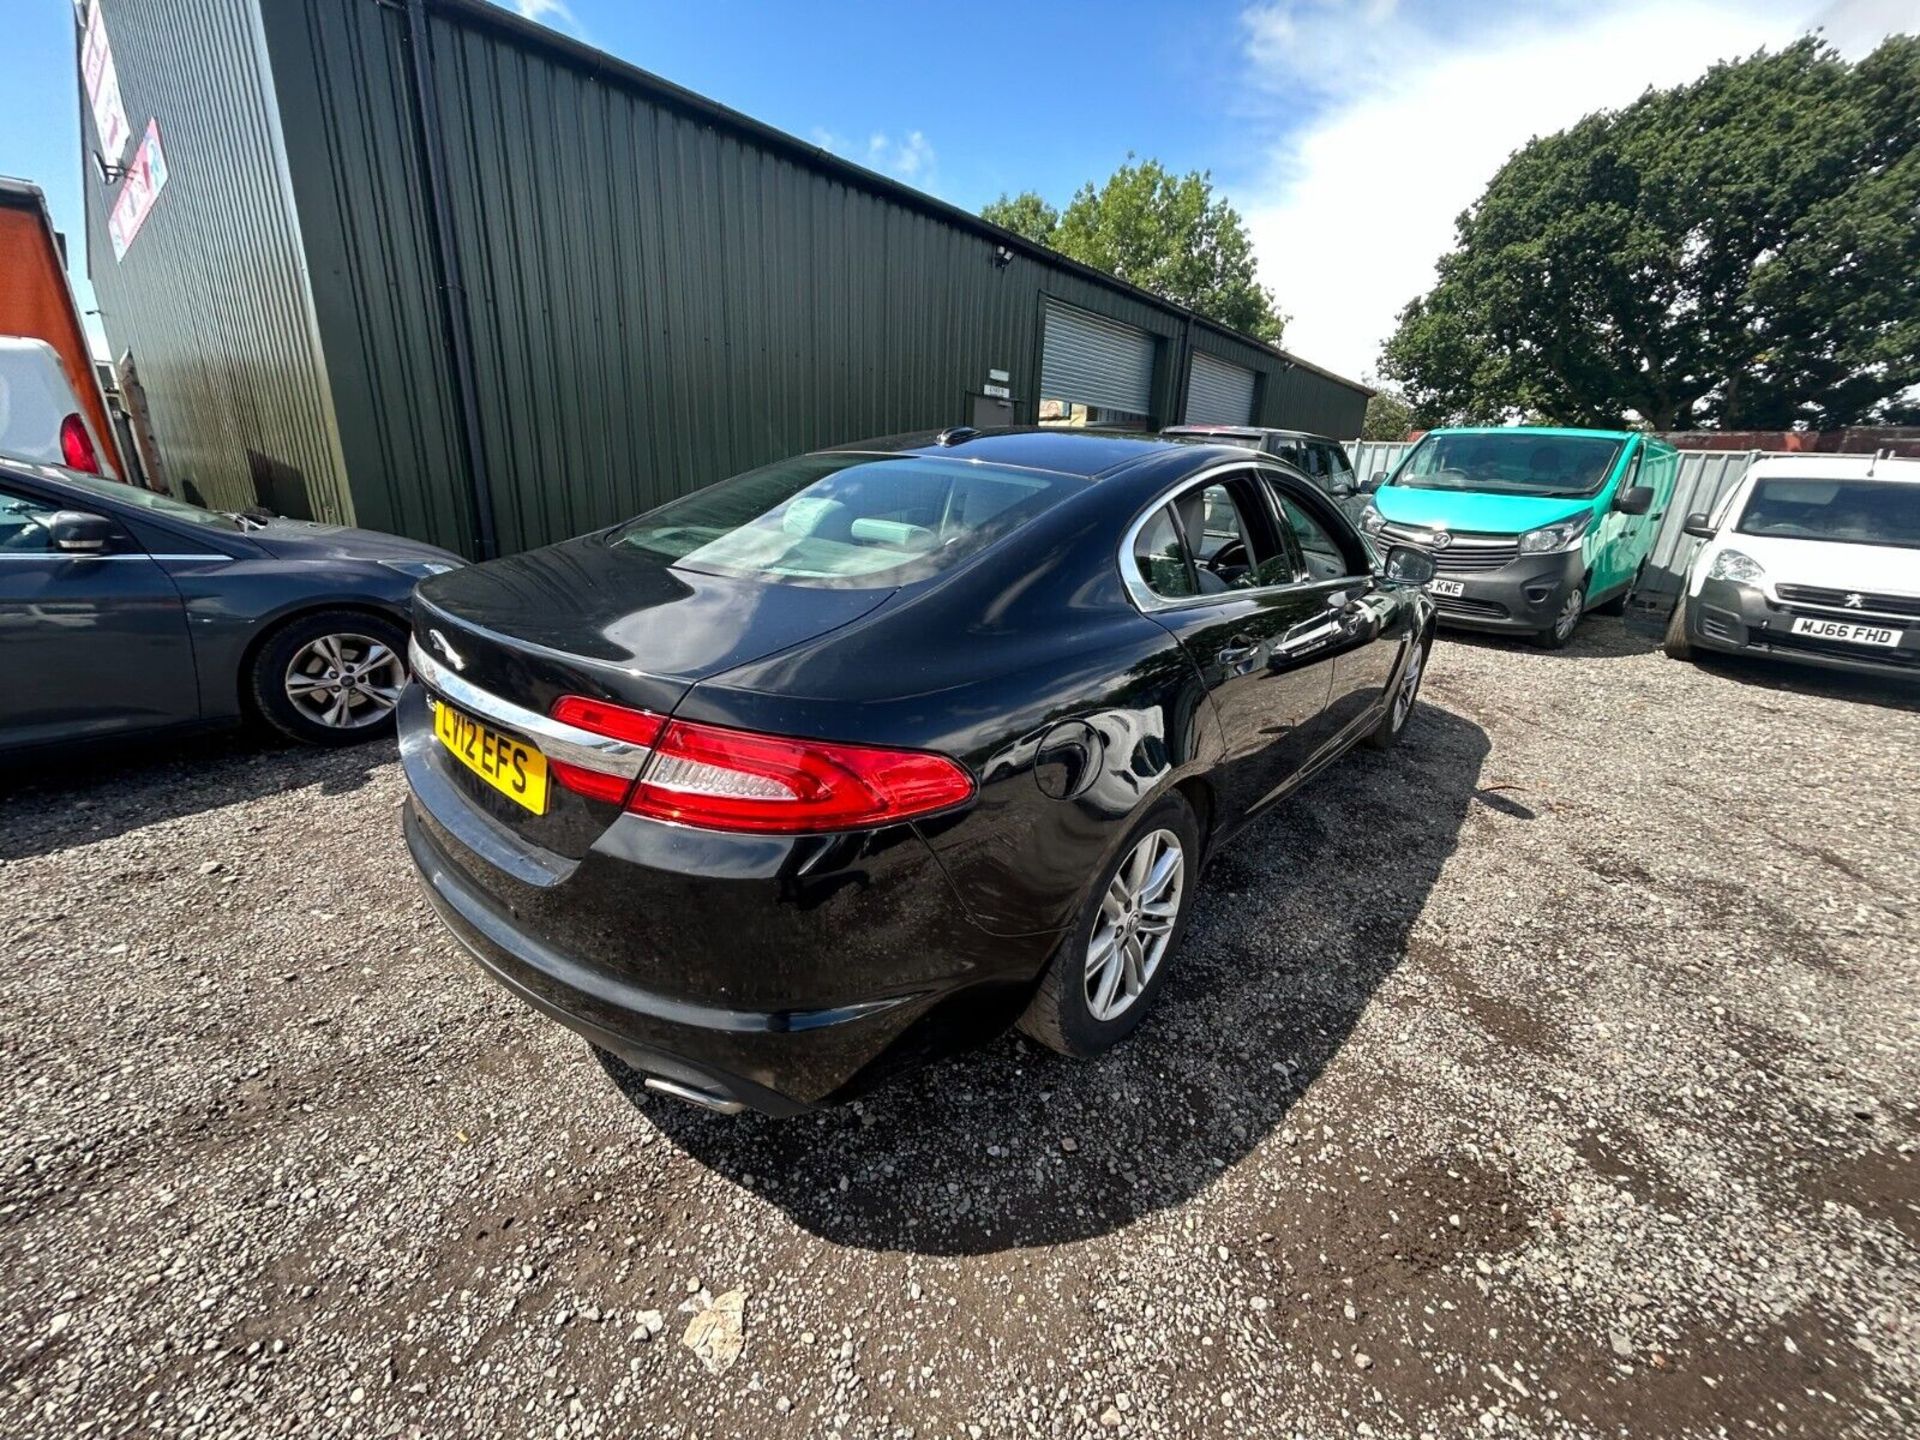 2012 JAGUAR XF LUXURY AUTOMATIC SWB SALOON 5 DOOR STARTS AND DRIVES - Image 15 of 15